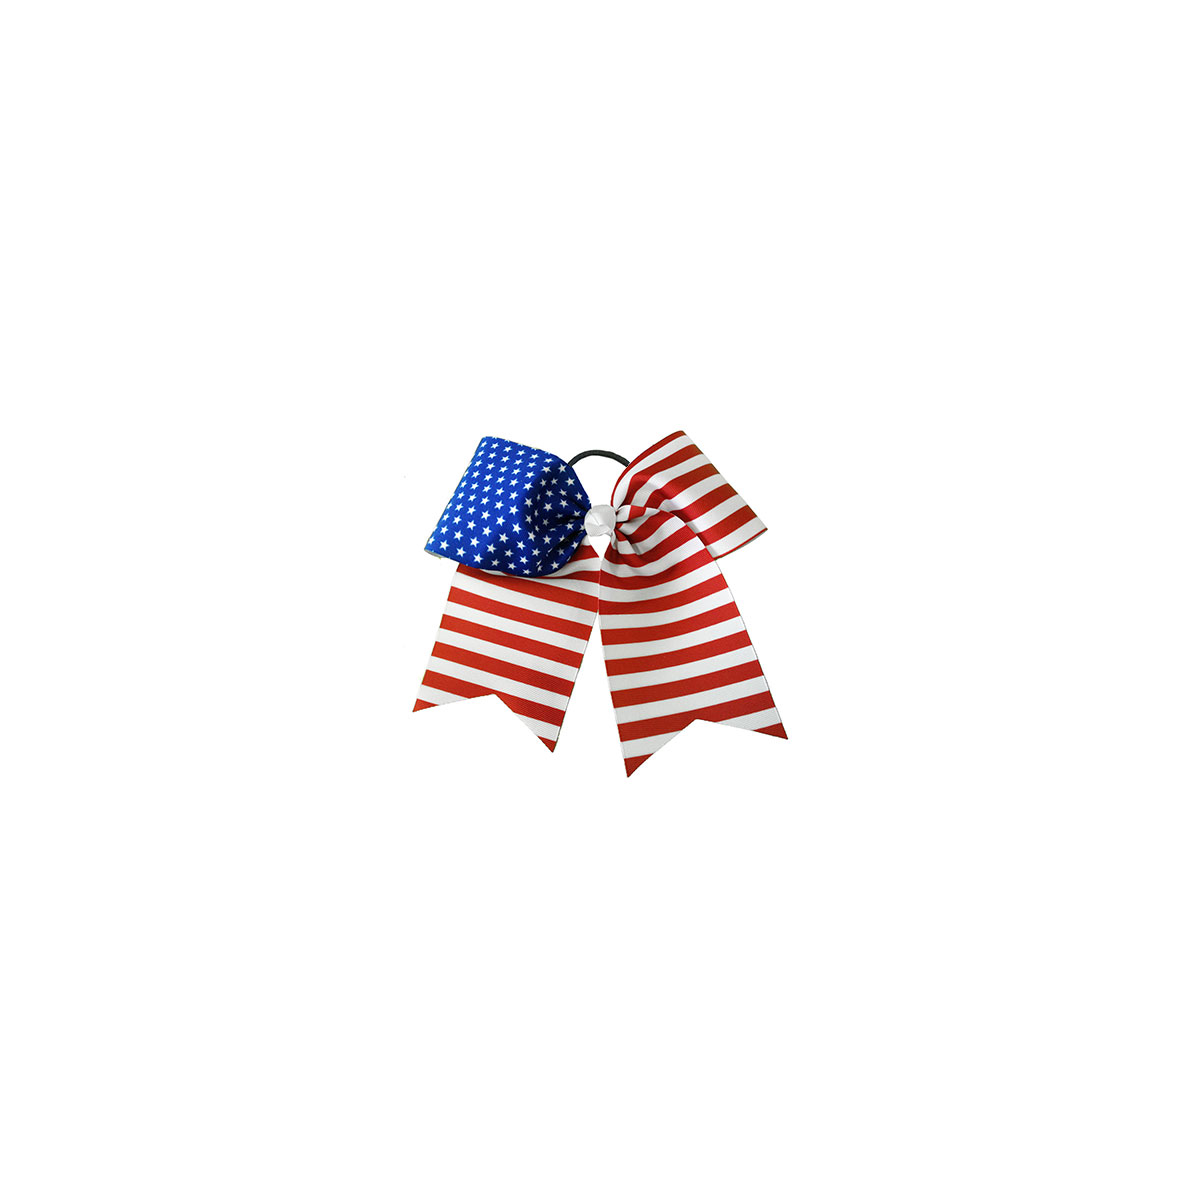 American Flag Patriotic USA Stars and Stripes Bow